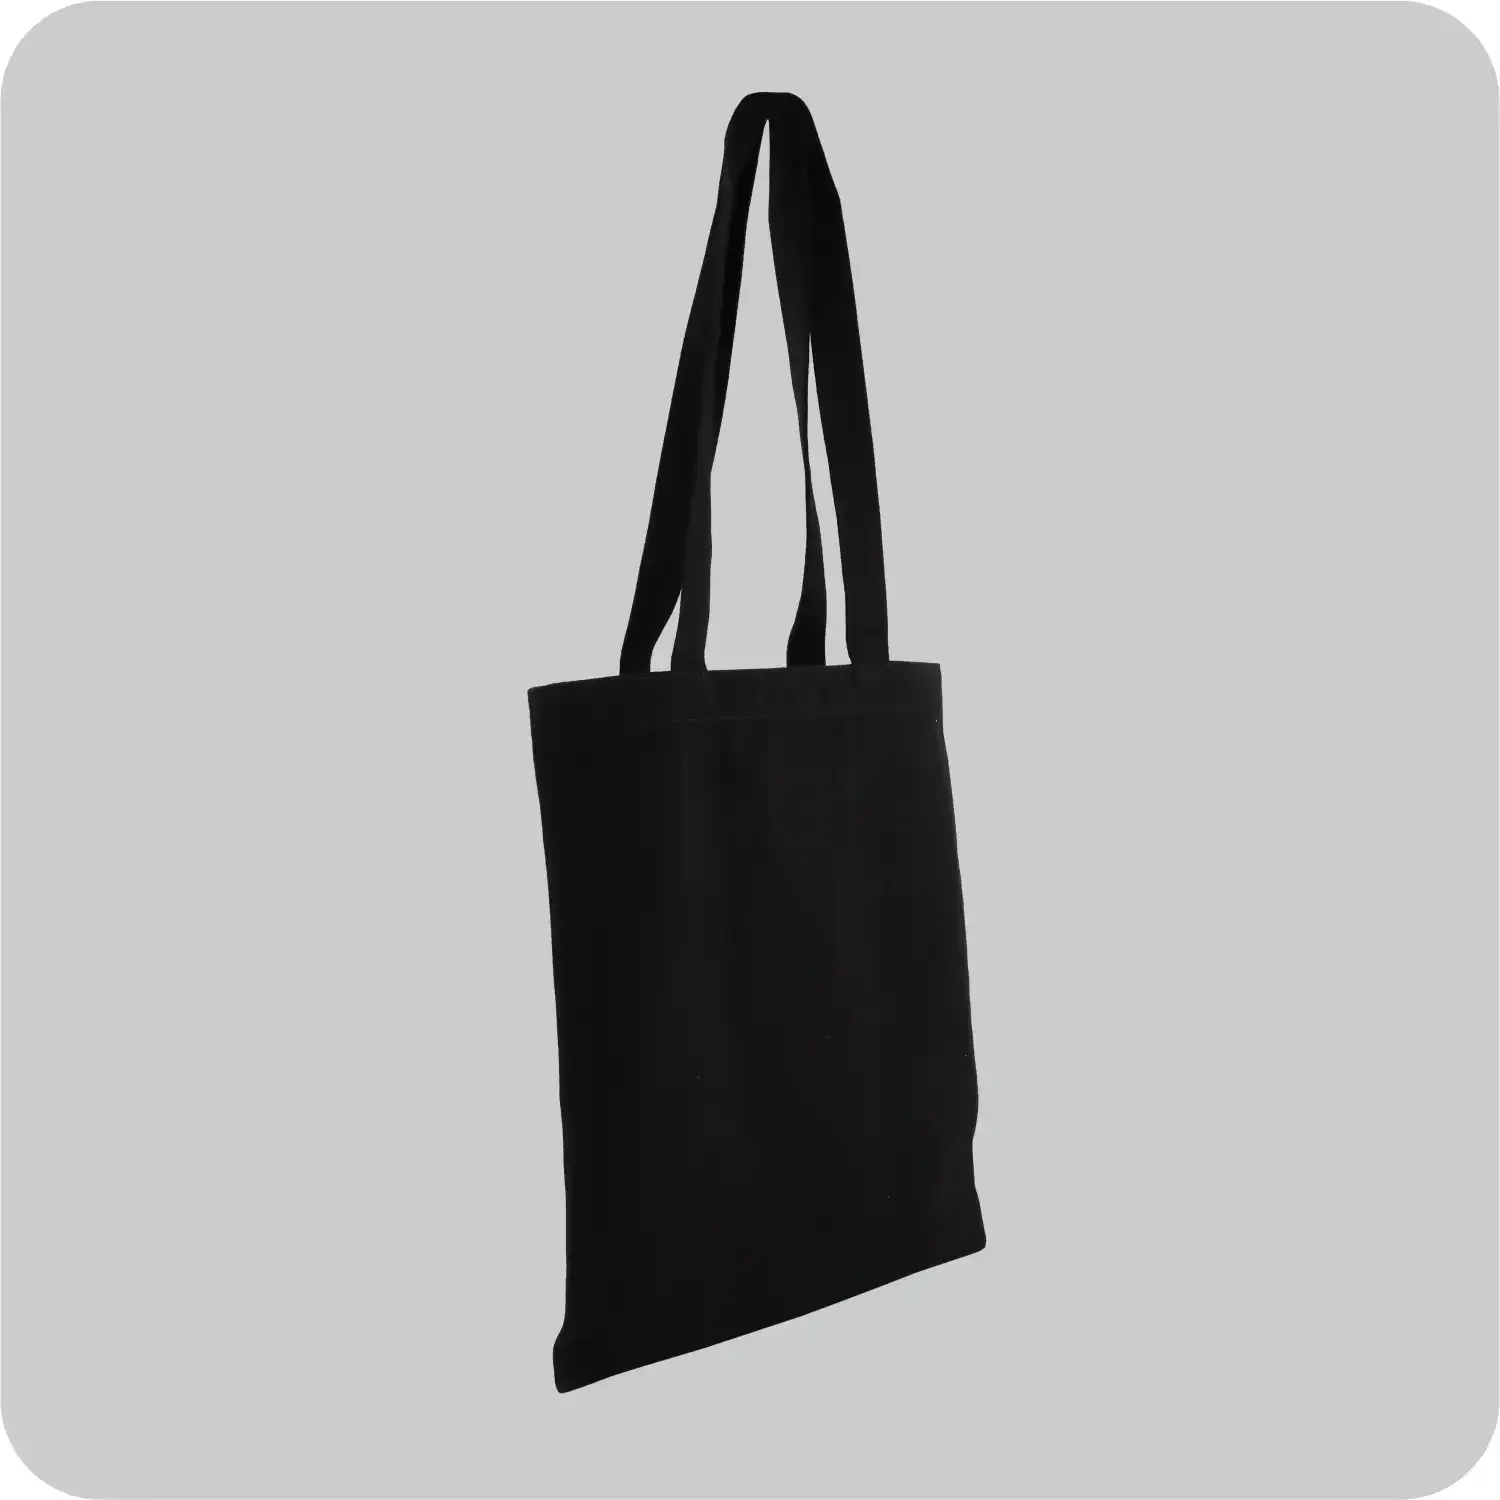 14” x 15” Inches Dazzling Vertically Shaped Pure Cotton Black Canvas Bags